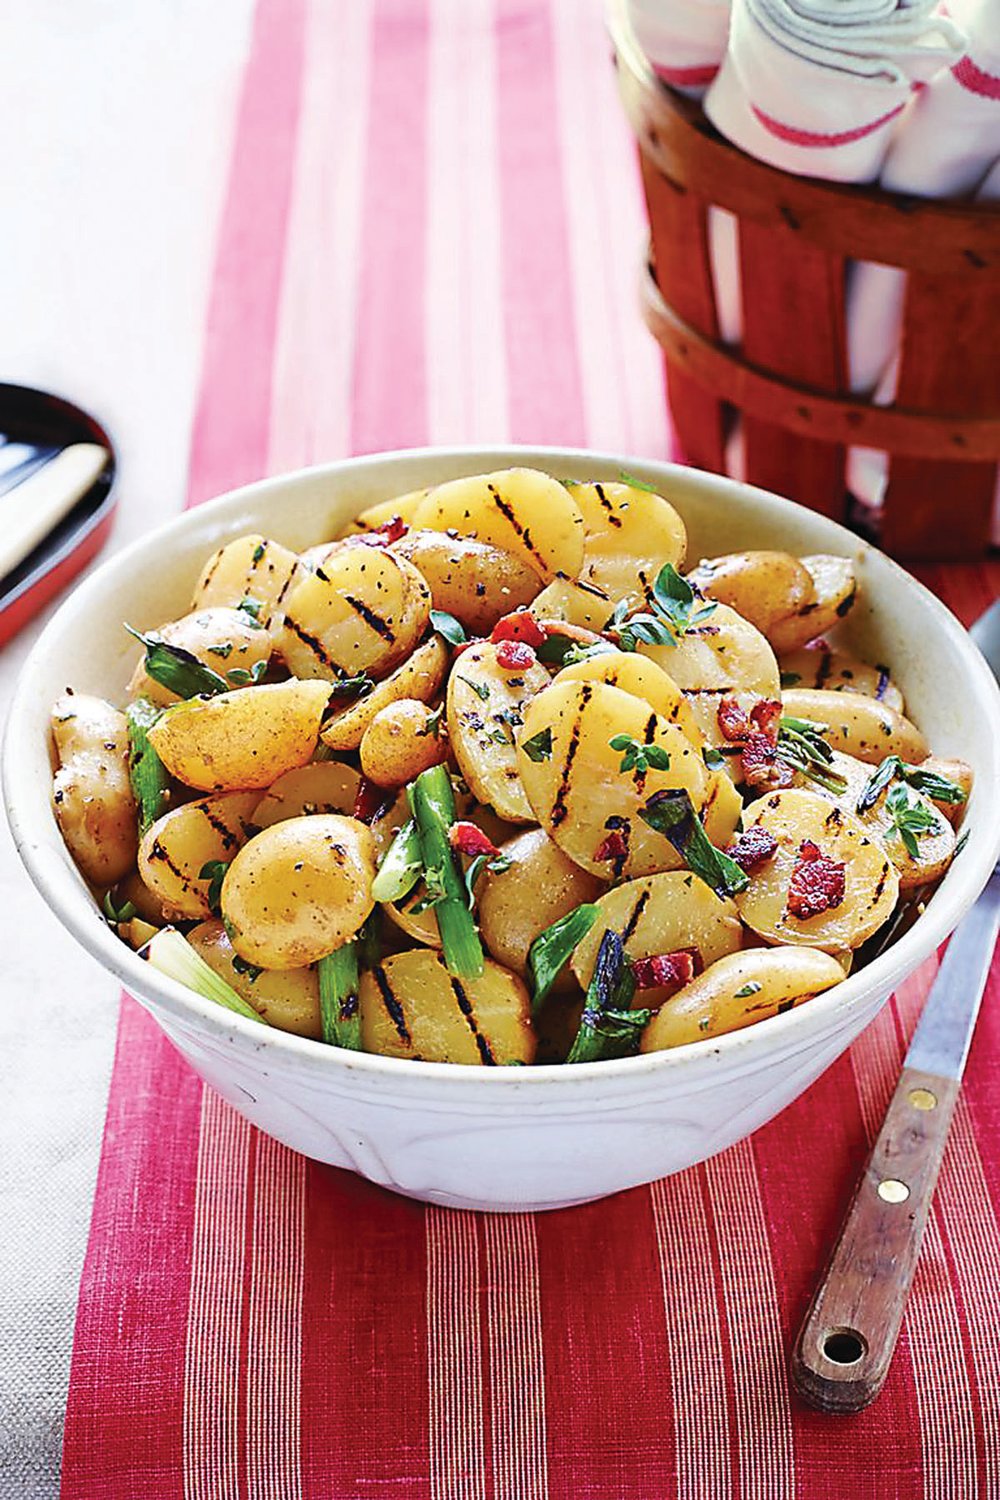 For something a little different for Memorial Day picnics, this warm salad includes potatoes that are boiled, then briefly grilled and finished with bacon vinaigrette.